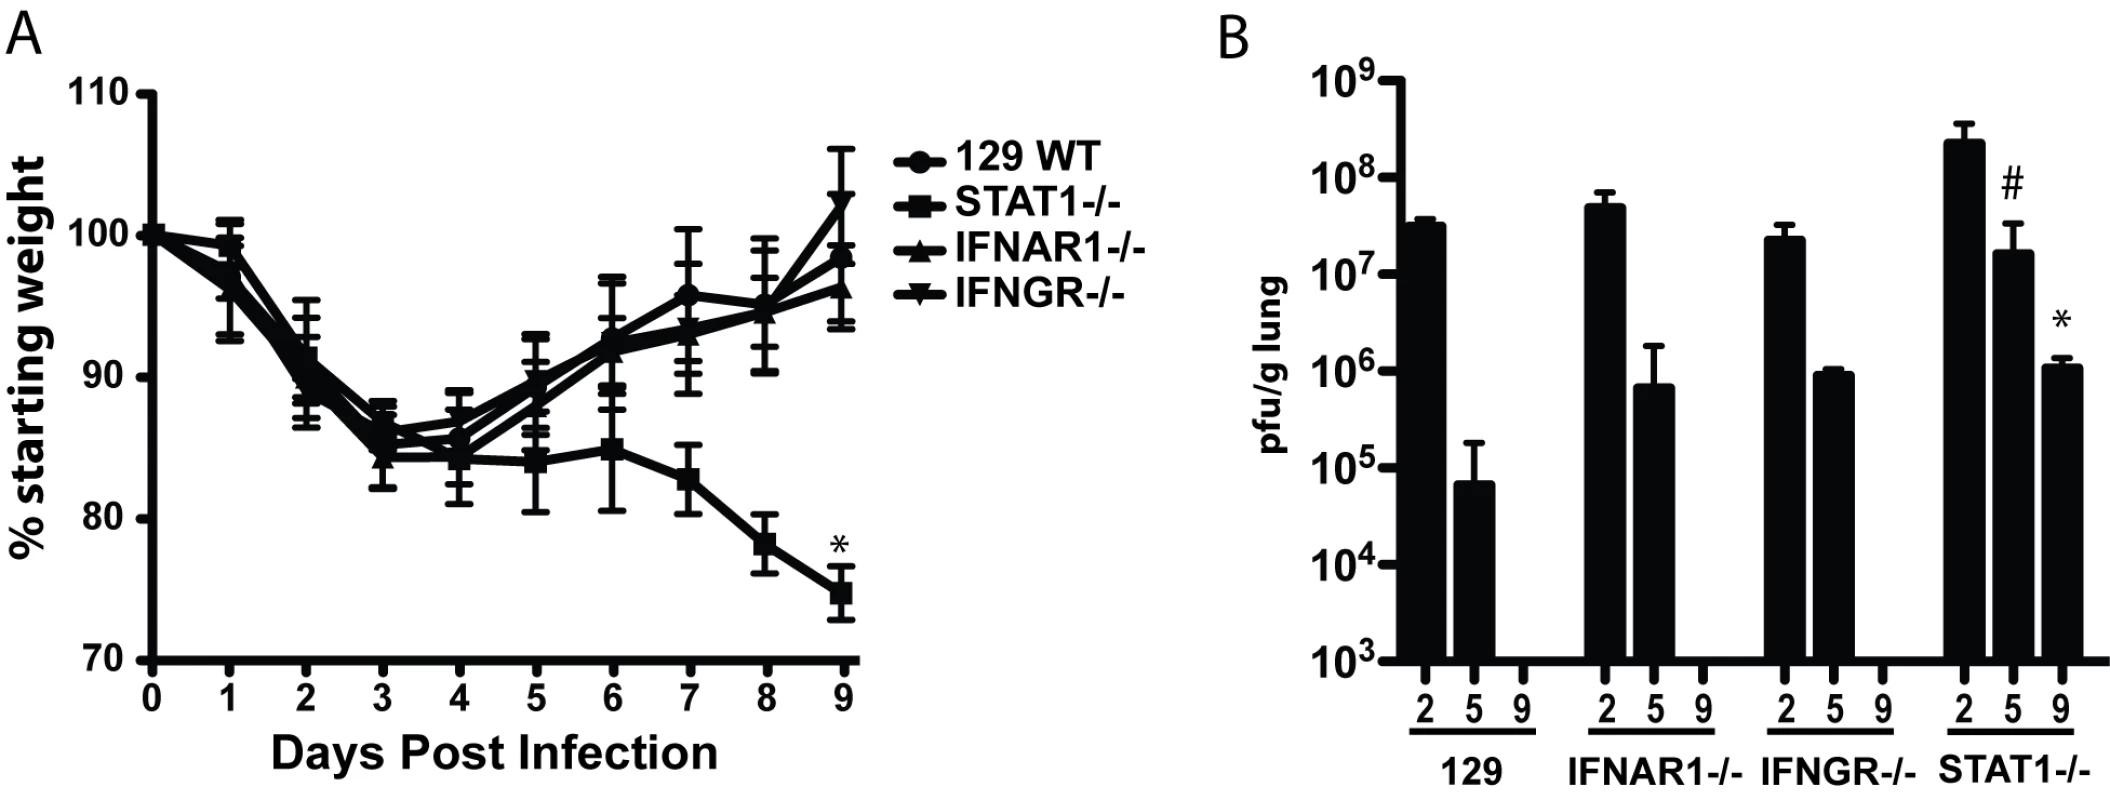 Mouse adapted SARS-CoV (rMA15) infection of 129 WT, IFNAR1−/−, IFNGR−/− and STAT1−/− mice.